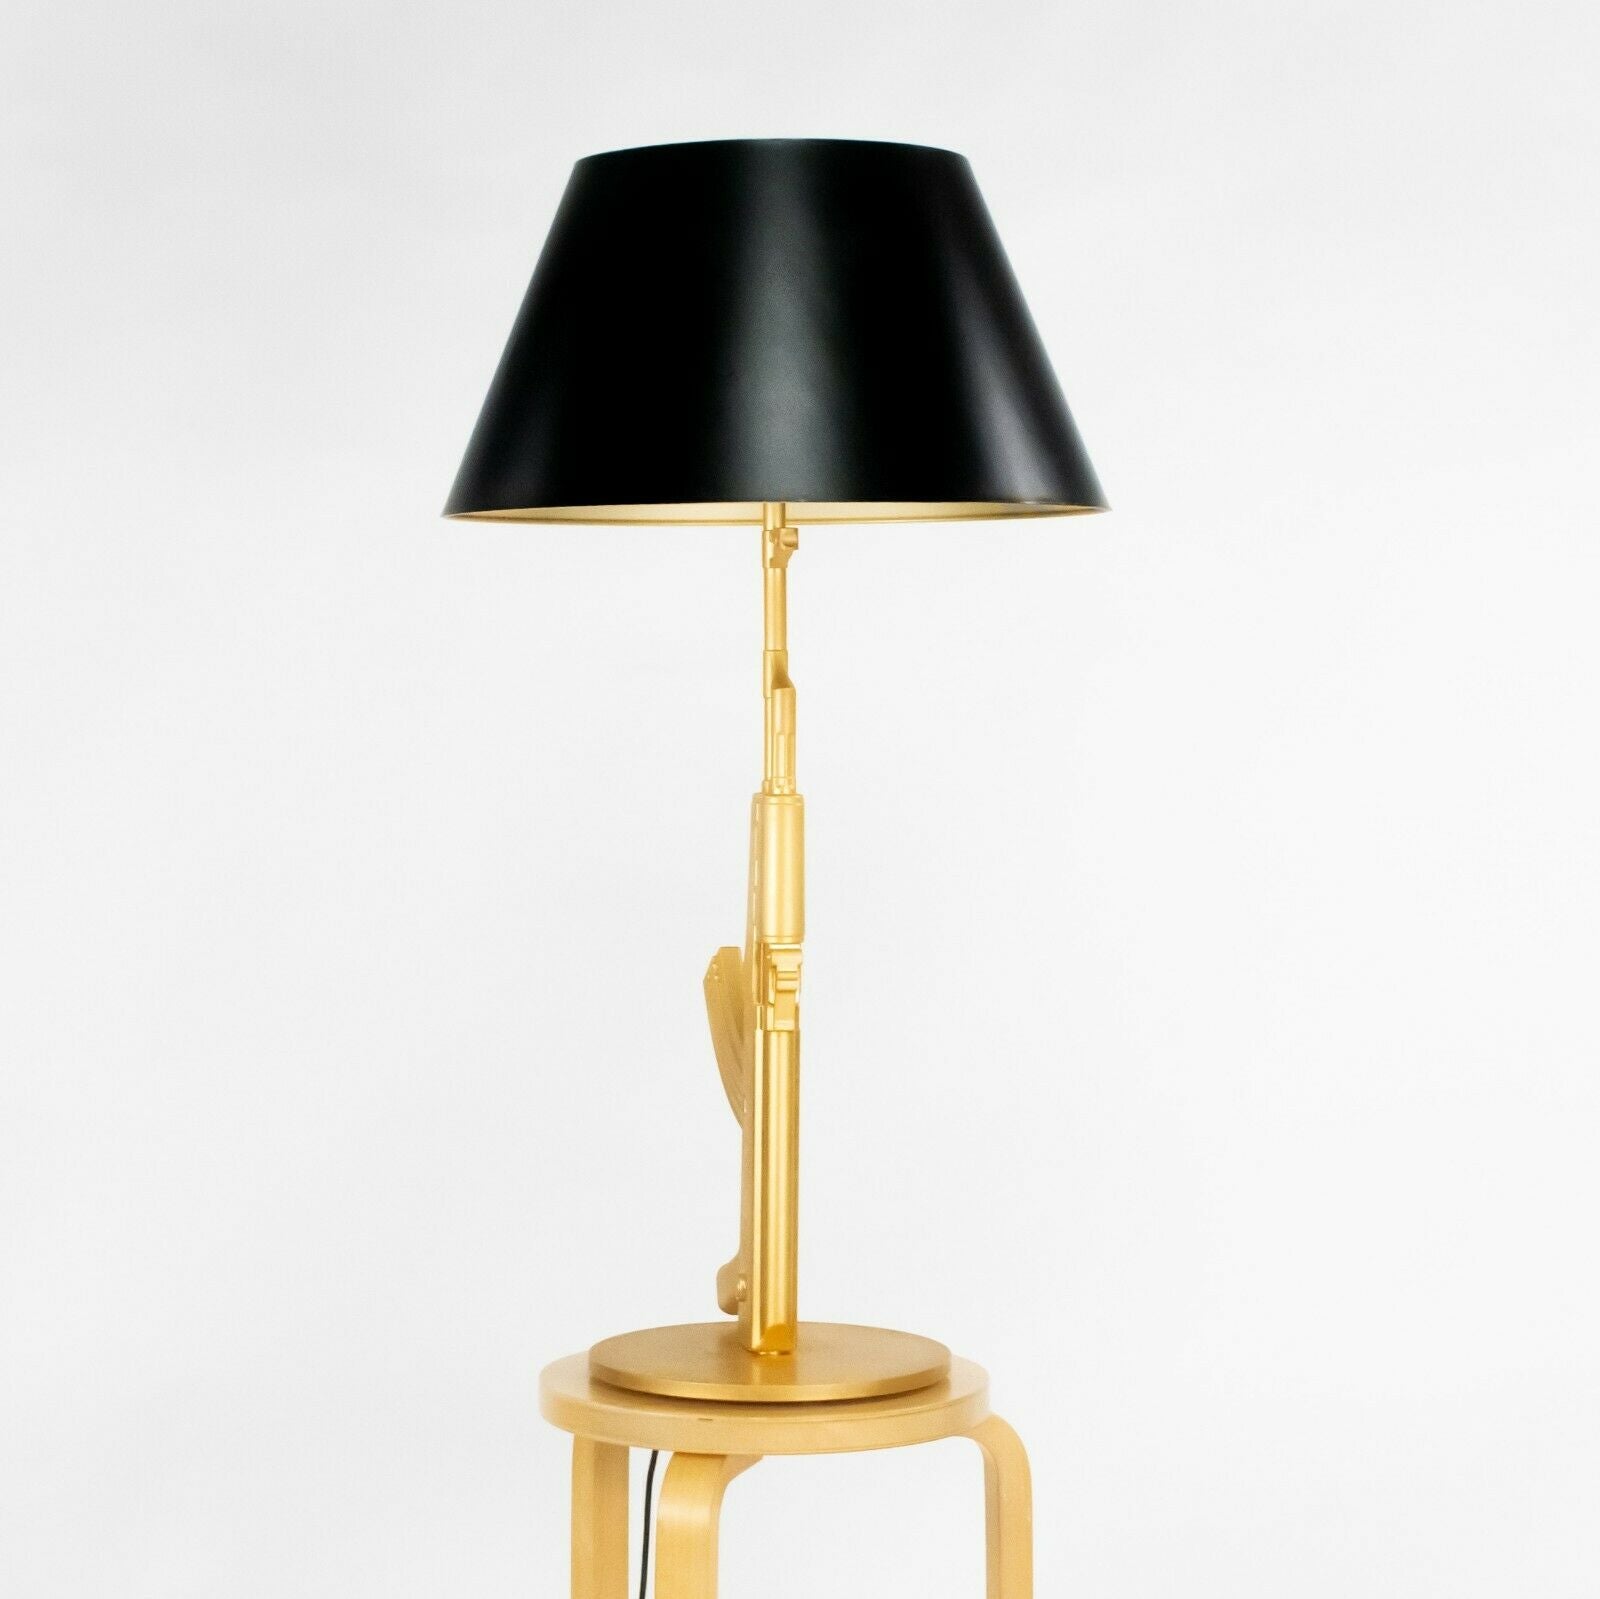 SOLD 2006 Philippe Starck Design for Flos AK47 Table Lamp in Matte 18k Gold Plate